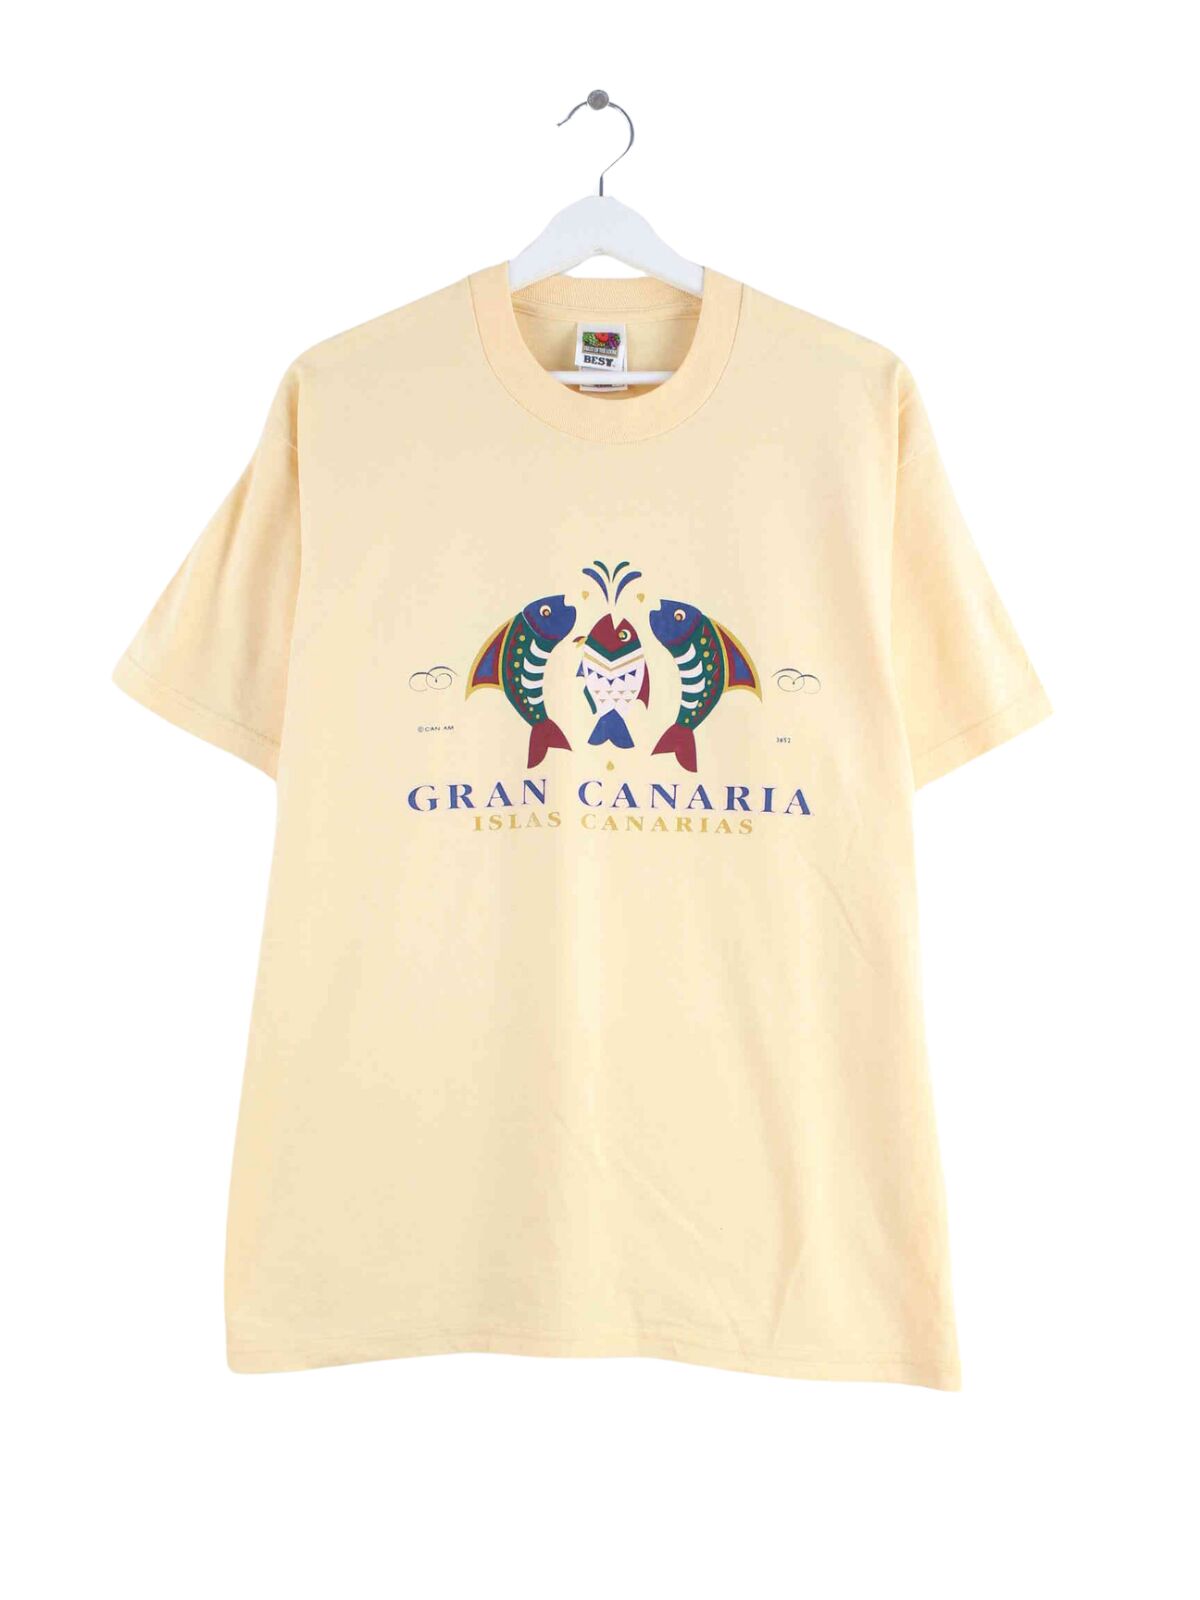 Fruit of the Loom y2k Gran Canaria Print T-Shirt Gelb L (front image)